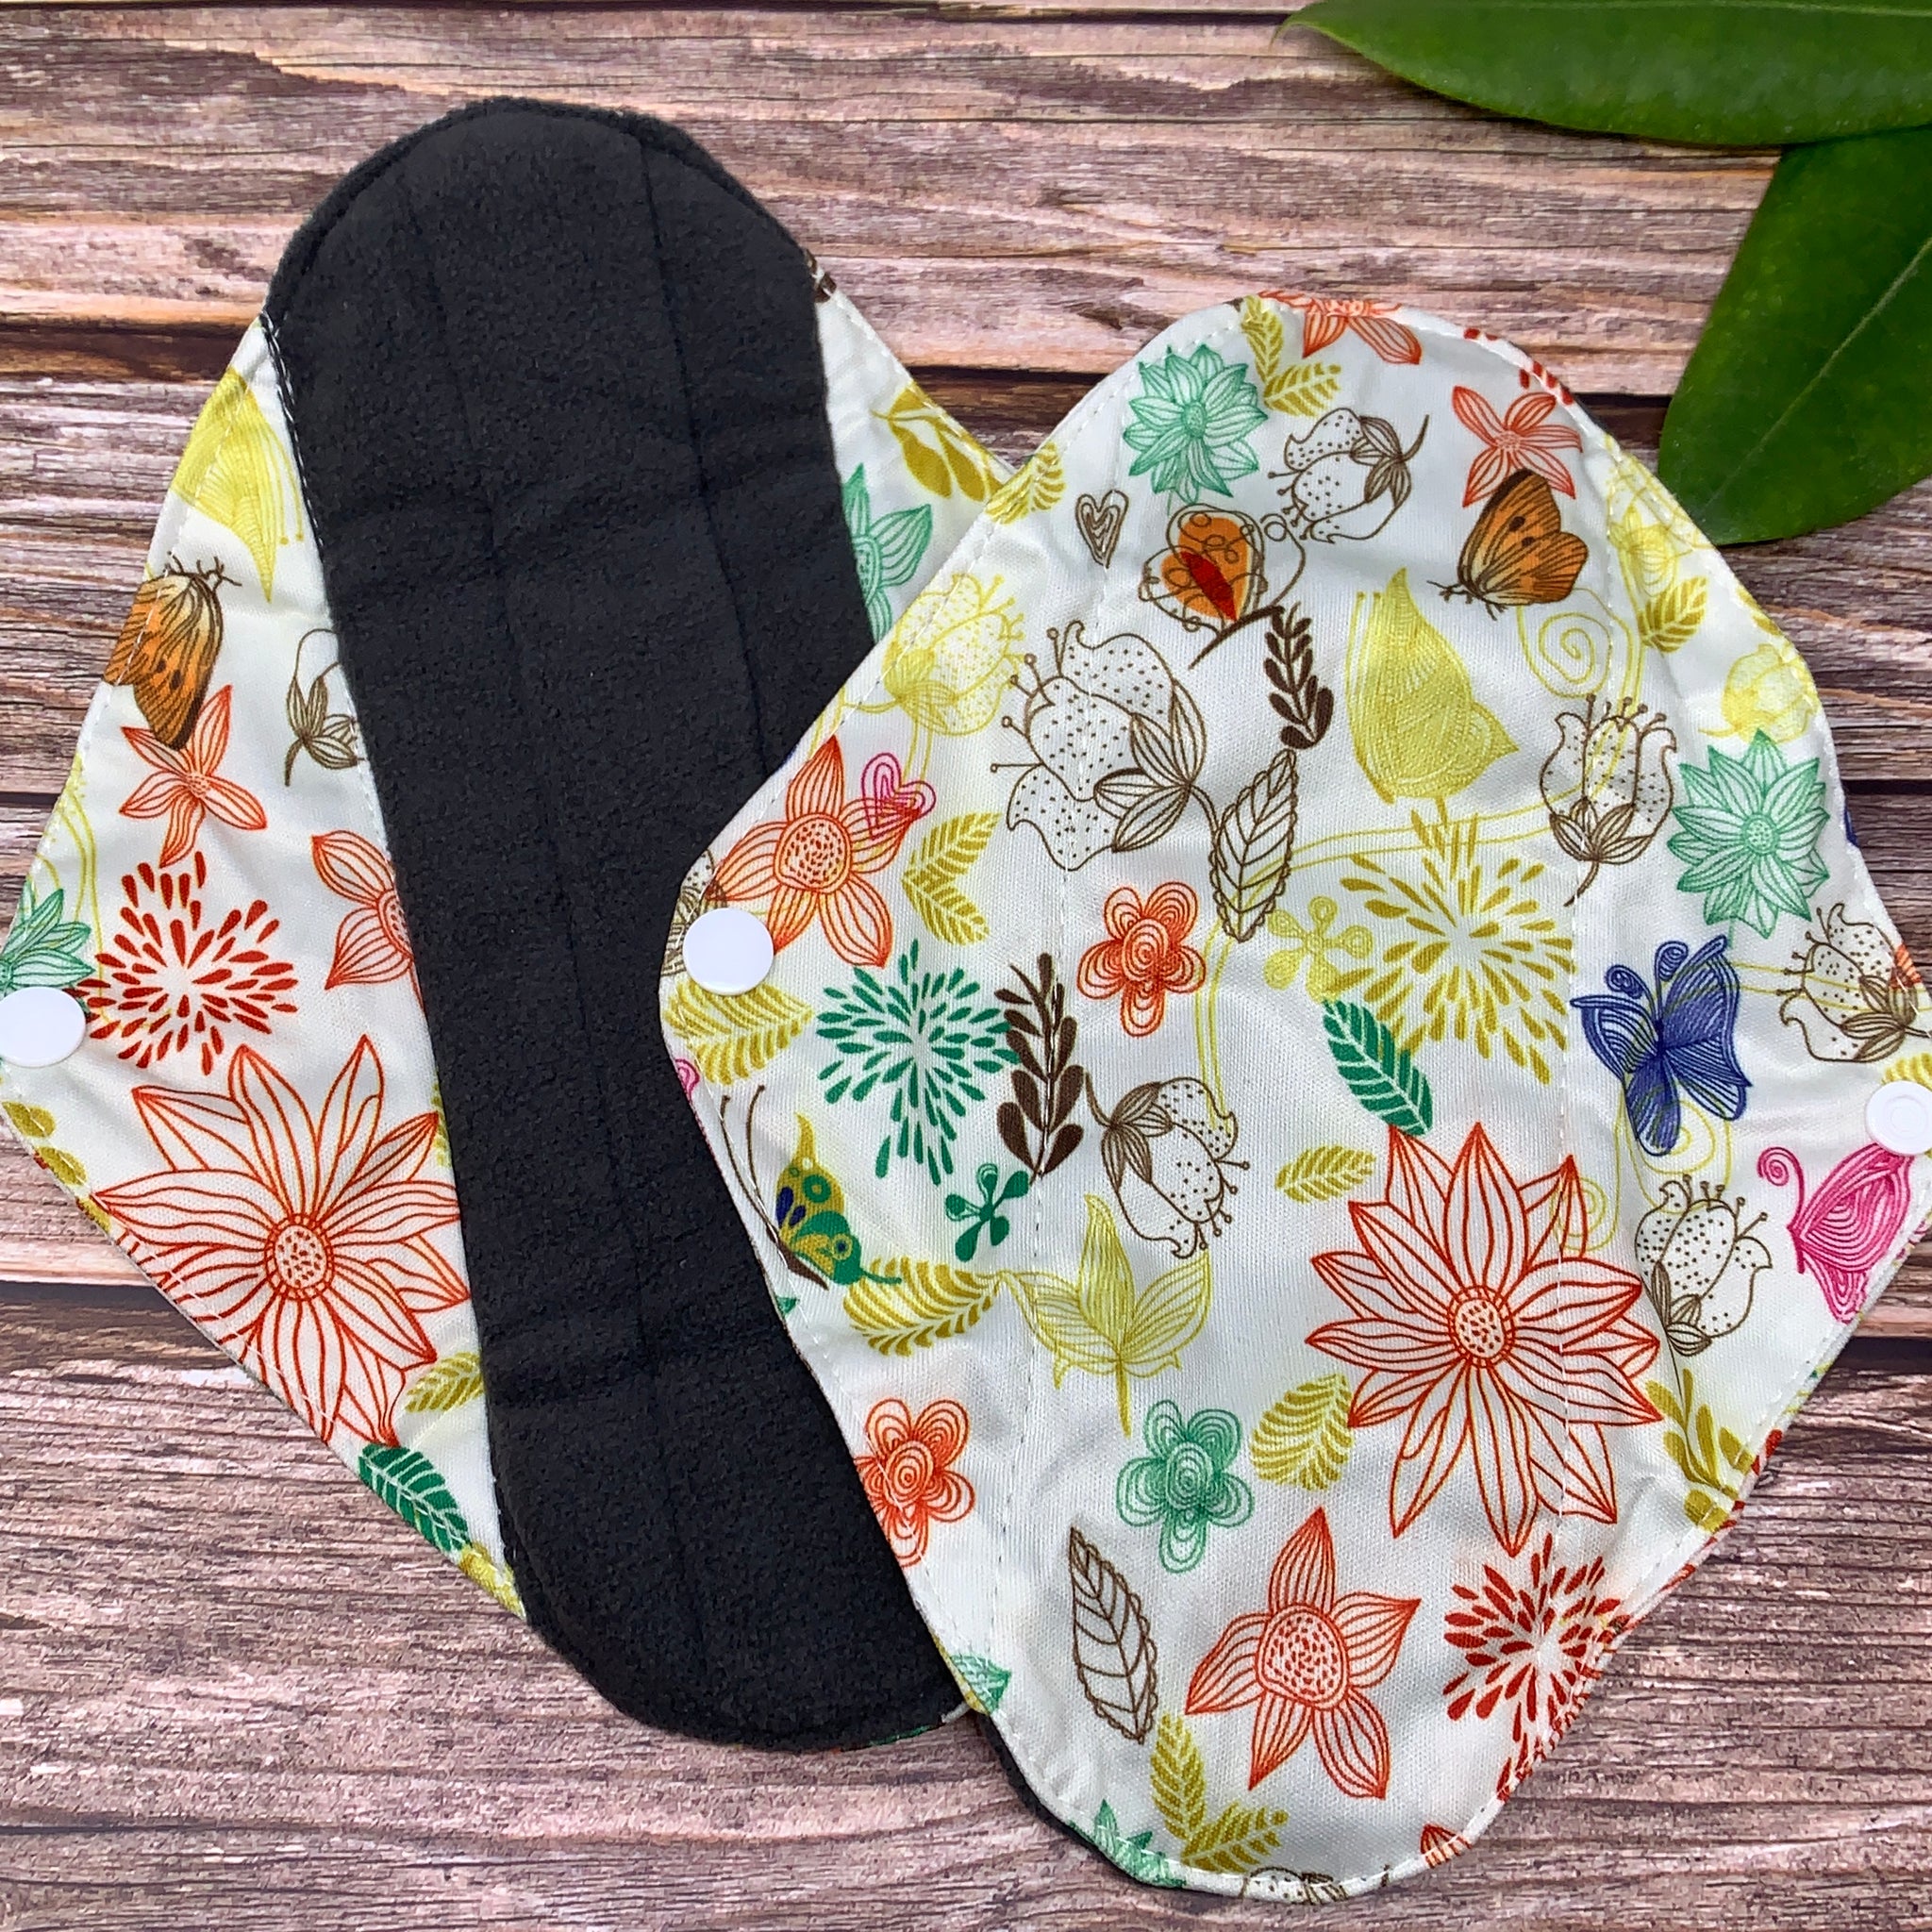 Re:pad Reusable Cloth Sanitary Pads for women Sanitary Pad Sanitary Pad